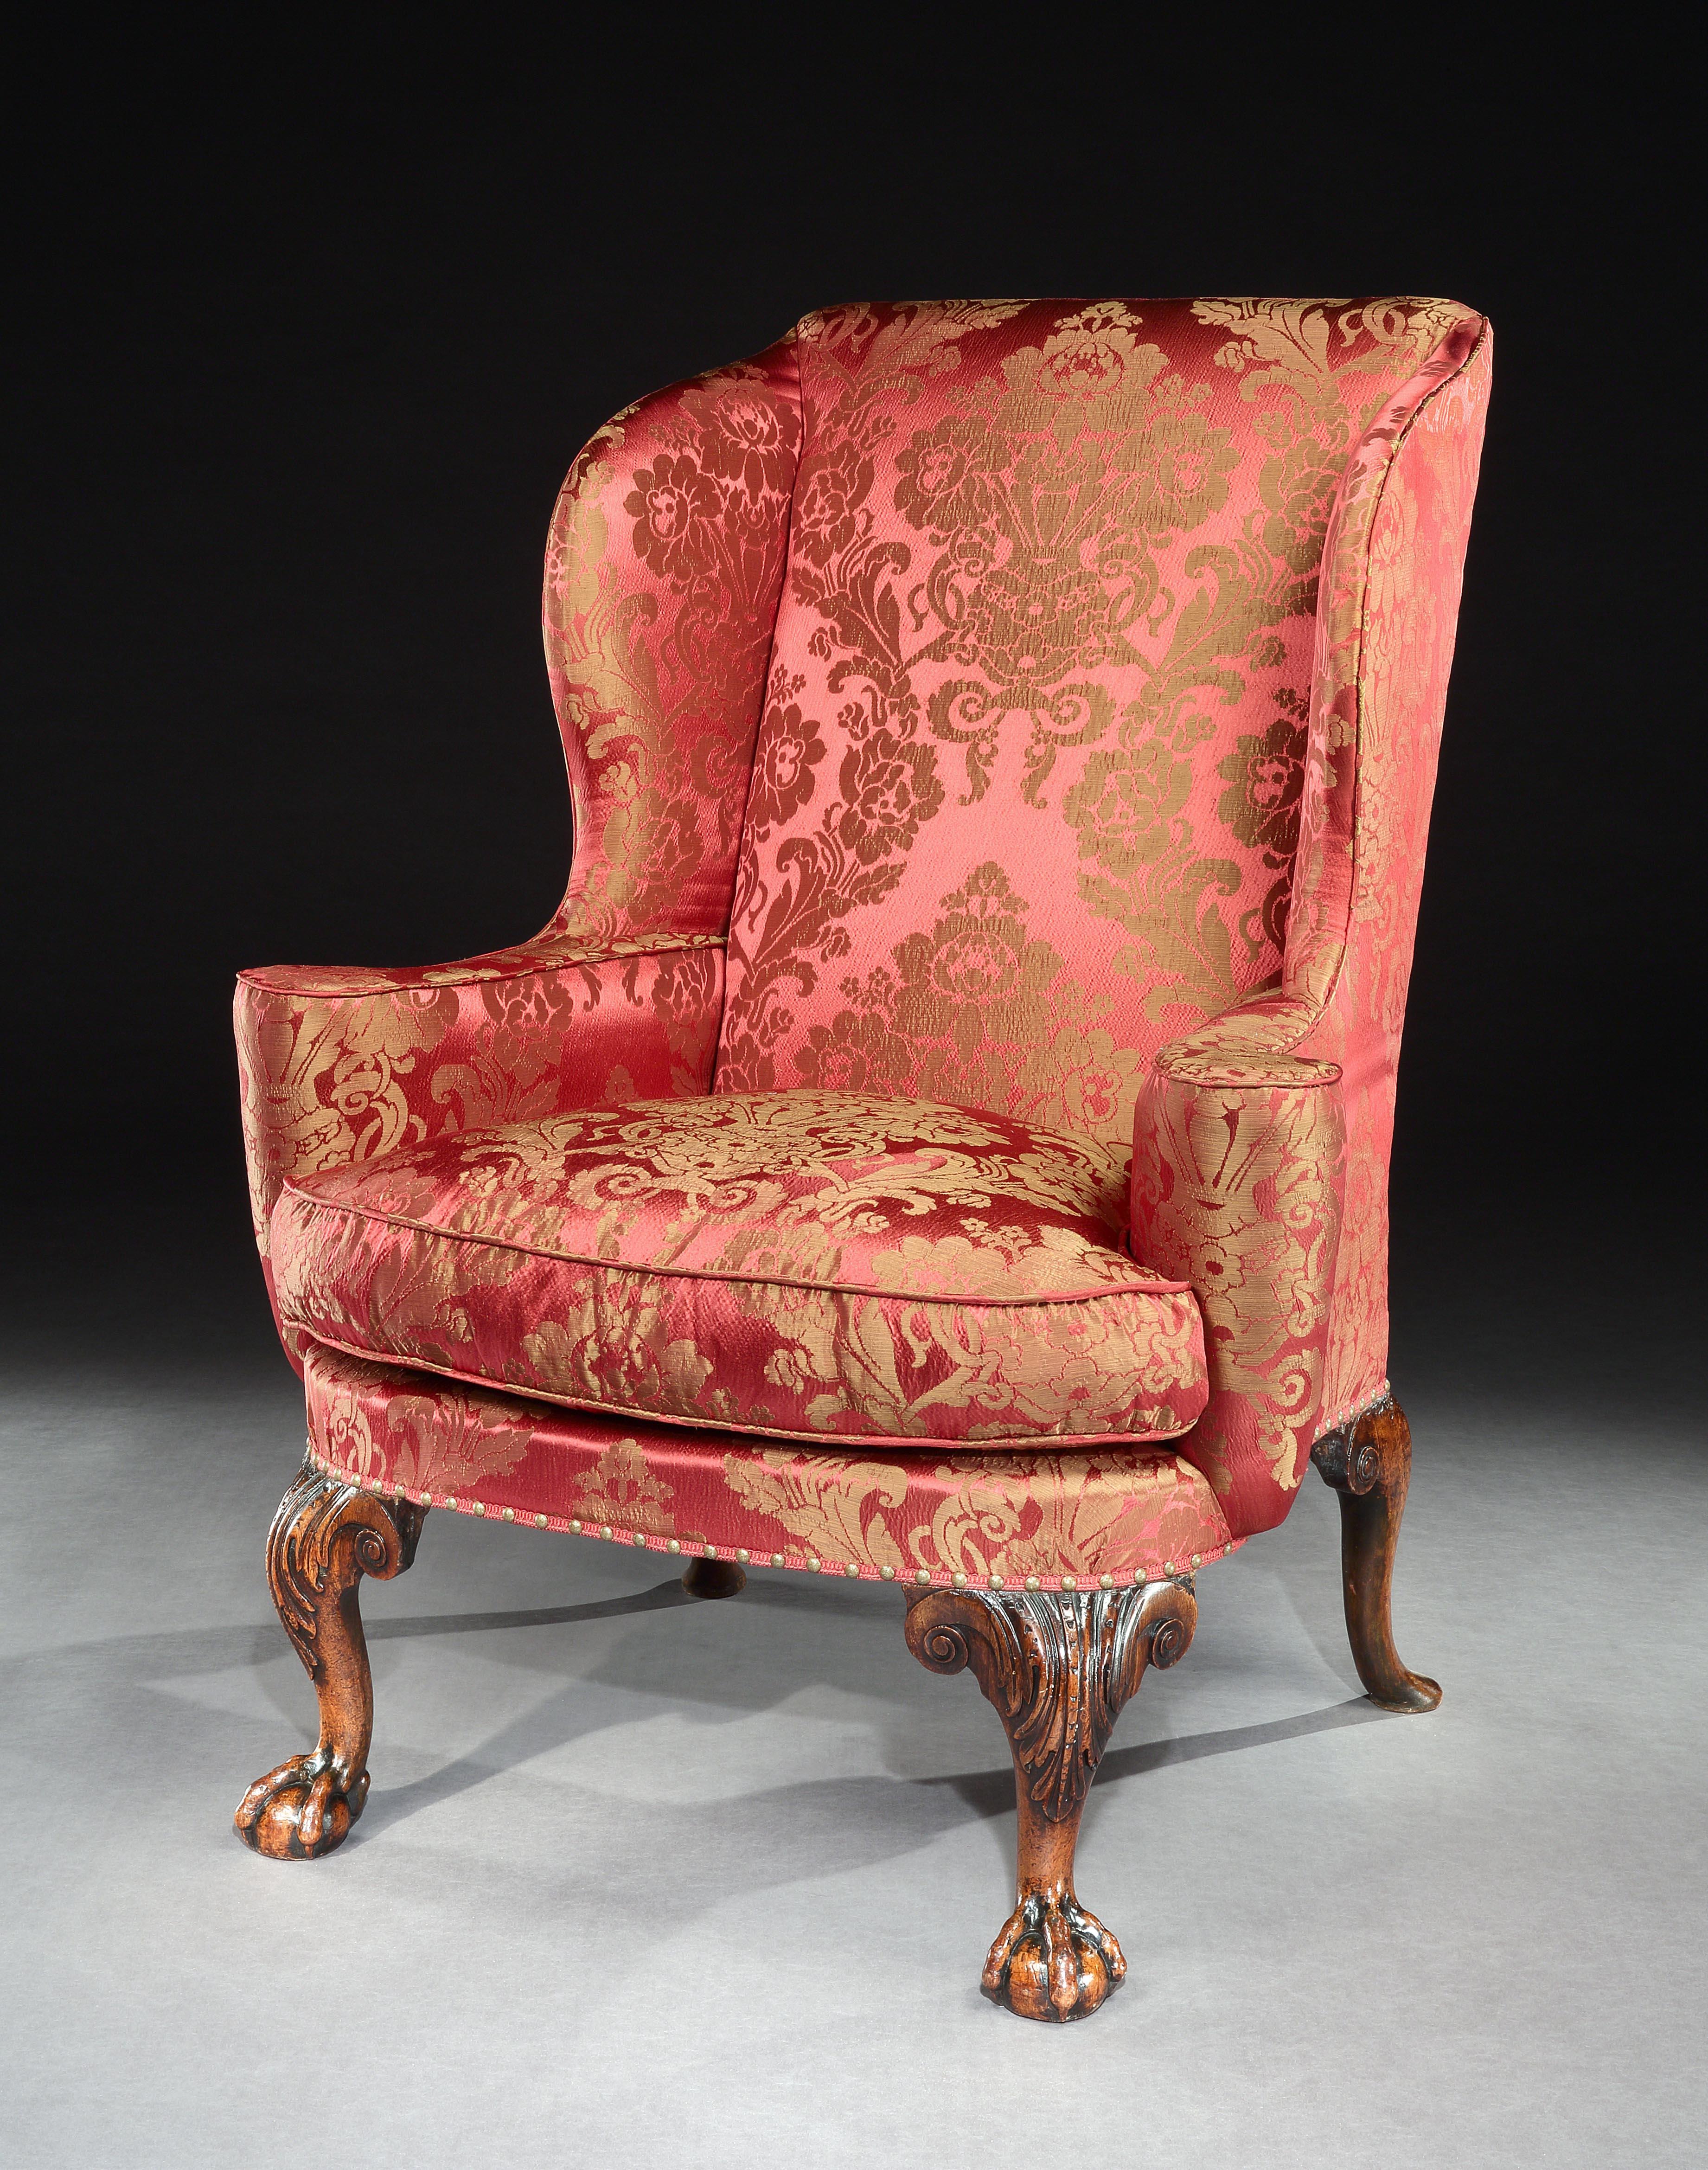 A particularly fine George I walnut wing chair, standing on acanthus carved cabriole legs terminating with ball and claw feet, the back legs well drawn and carved with scrolls.

This fine wing chair benefits from a great color and patina and